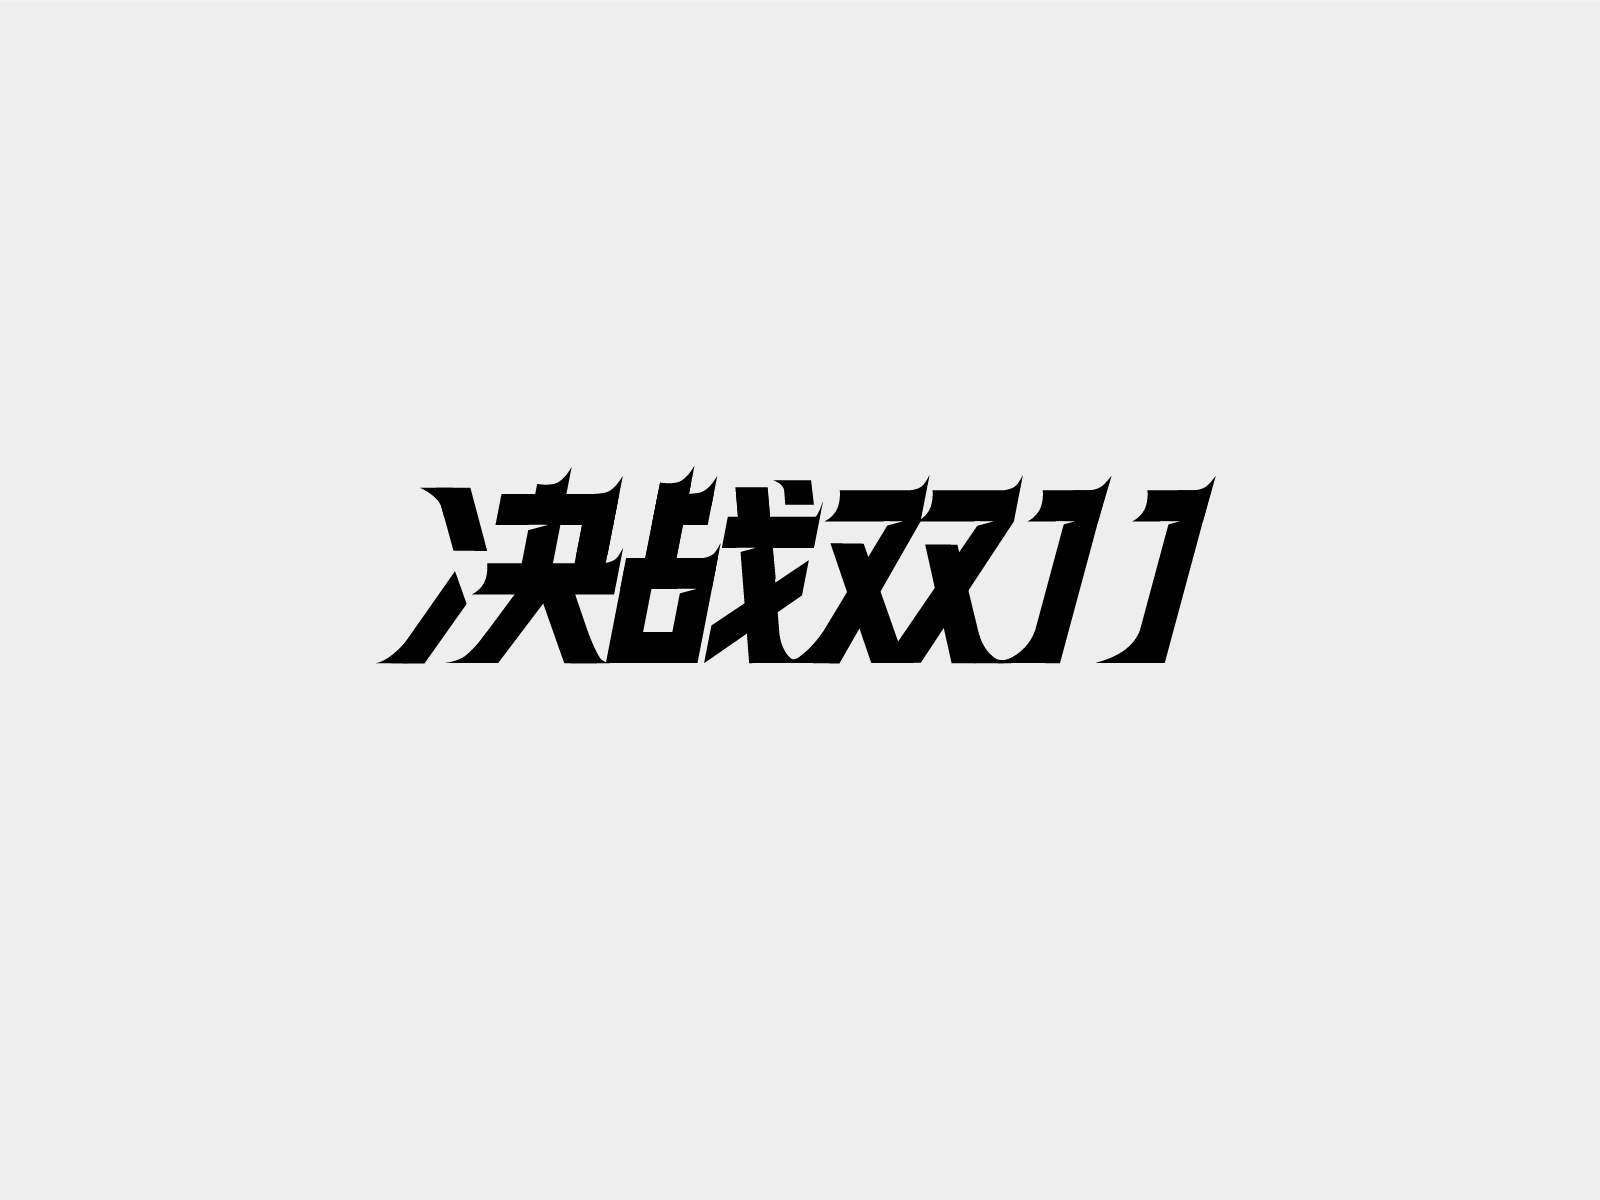 Chinese font design—决战双11 by zzjoy on Dribbble